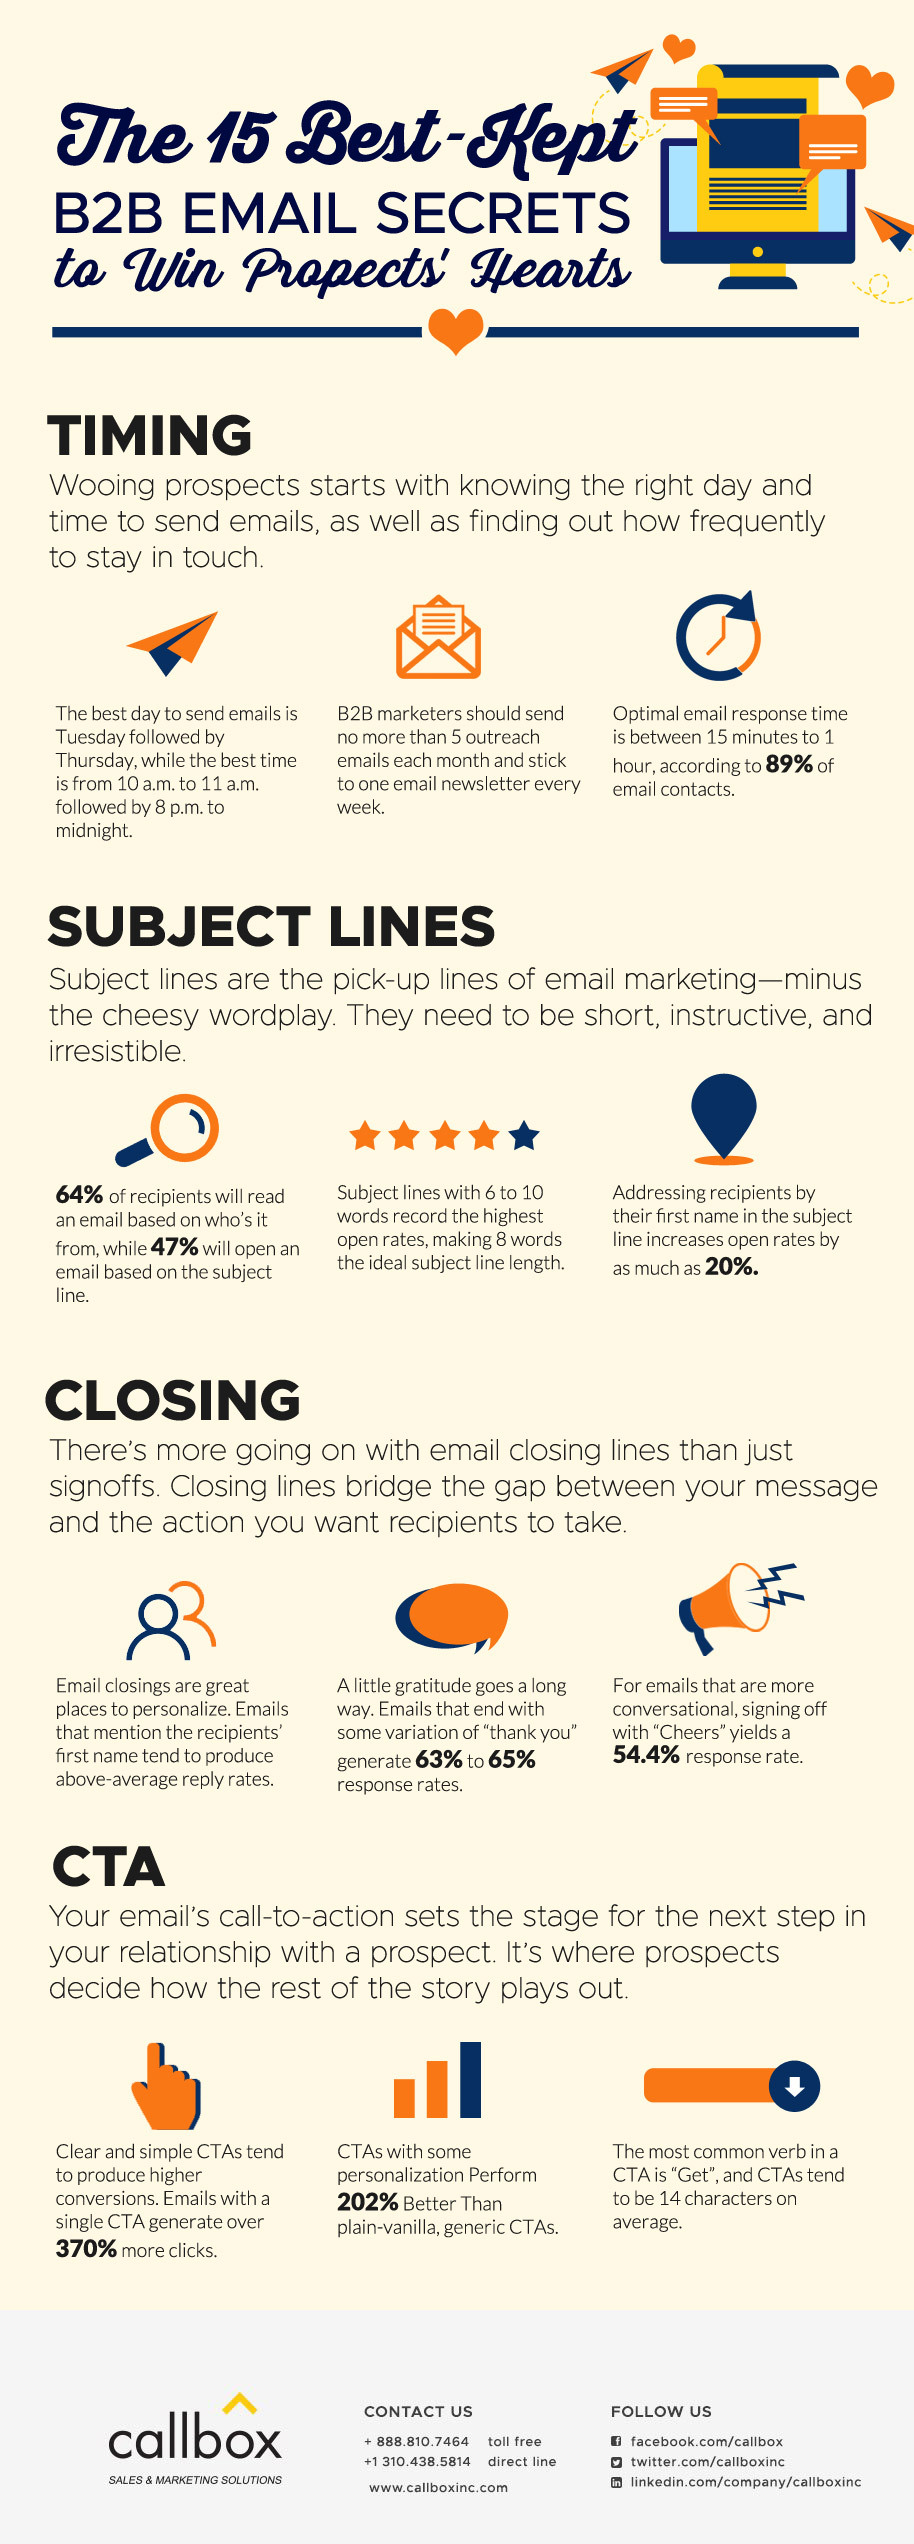 Infographic-The-15-Best-Kept-B2B-Email-Secrets-to-Win-Prospects-Hearts